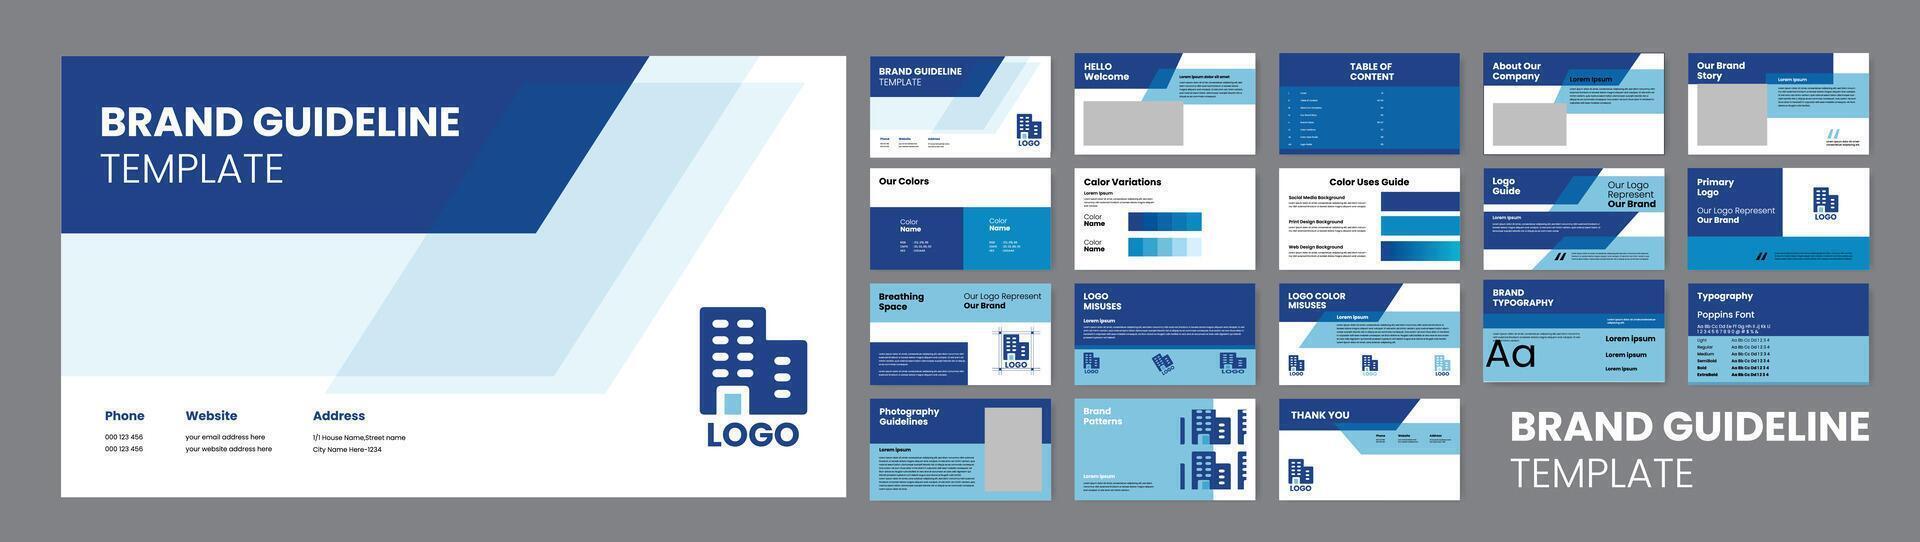 Style Guide Template for Branding Guidelines. Blue Accent Presentation Design. vector